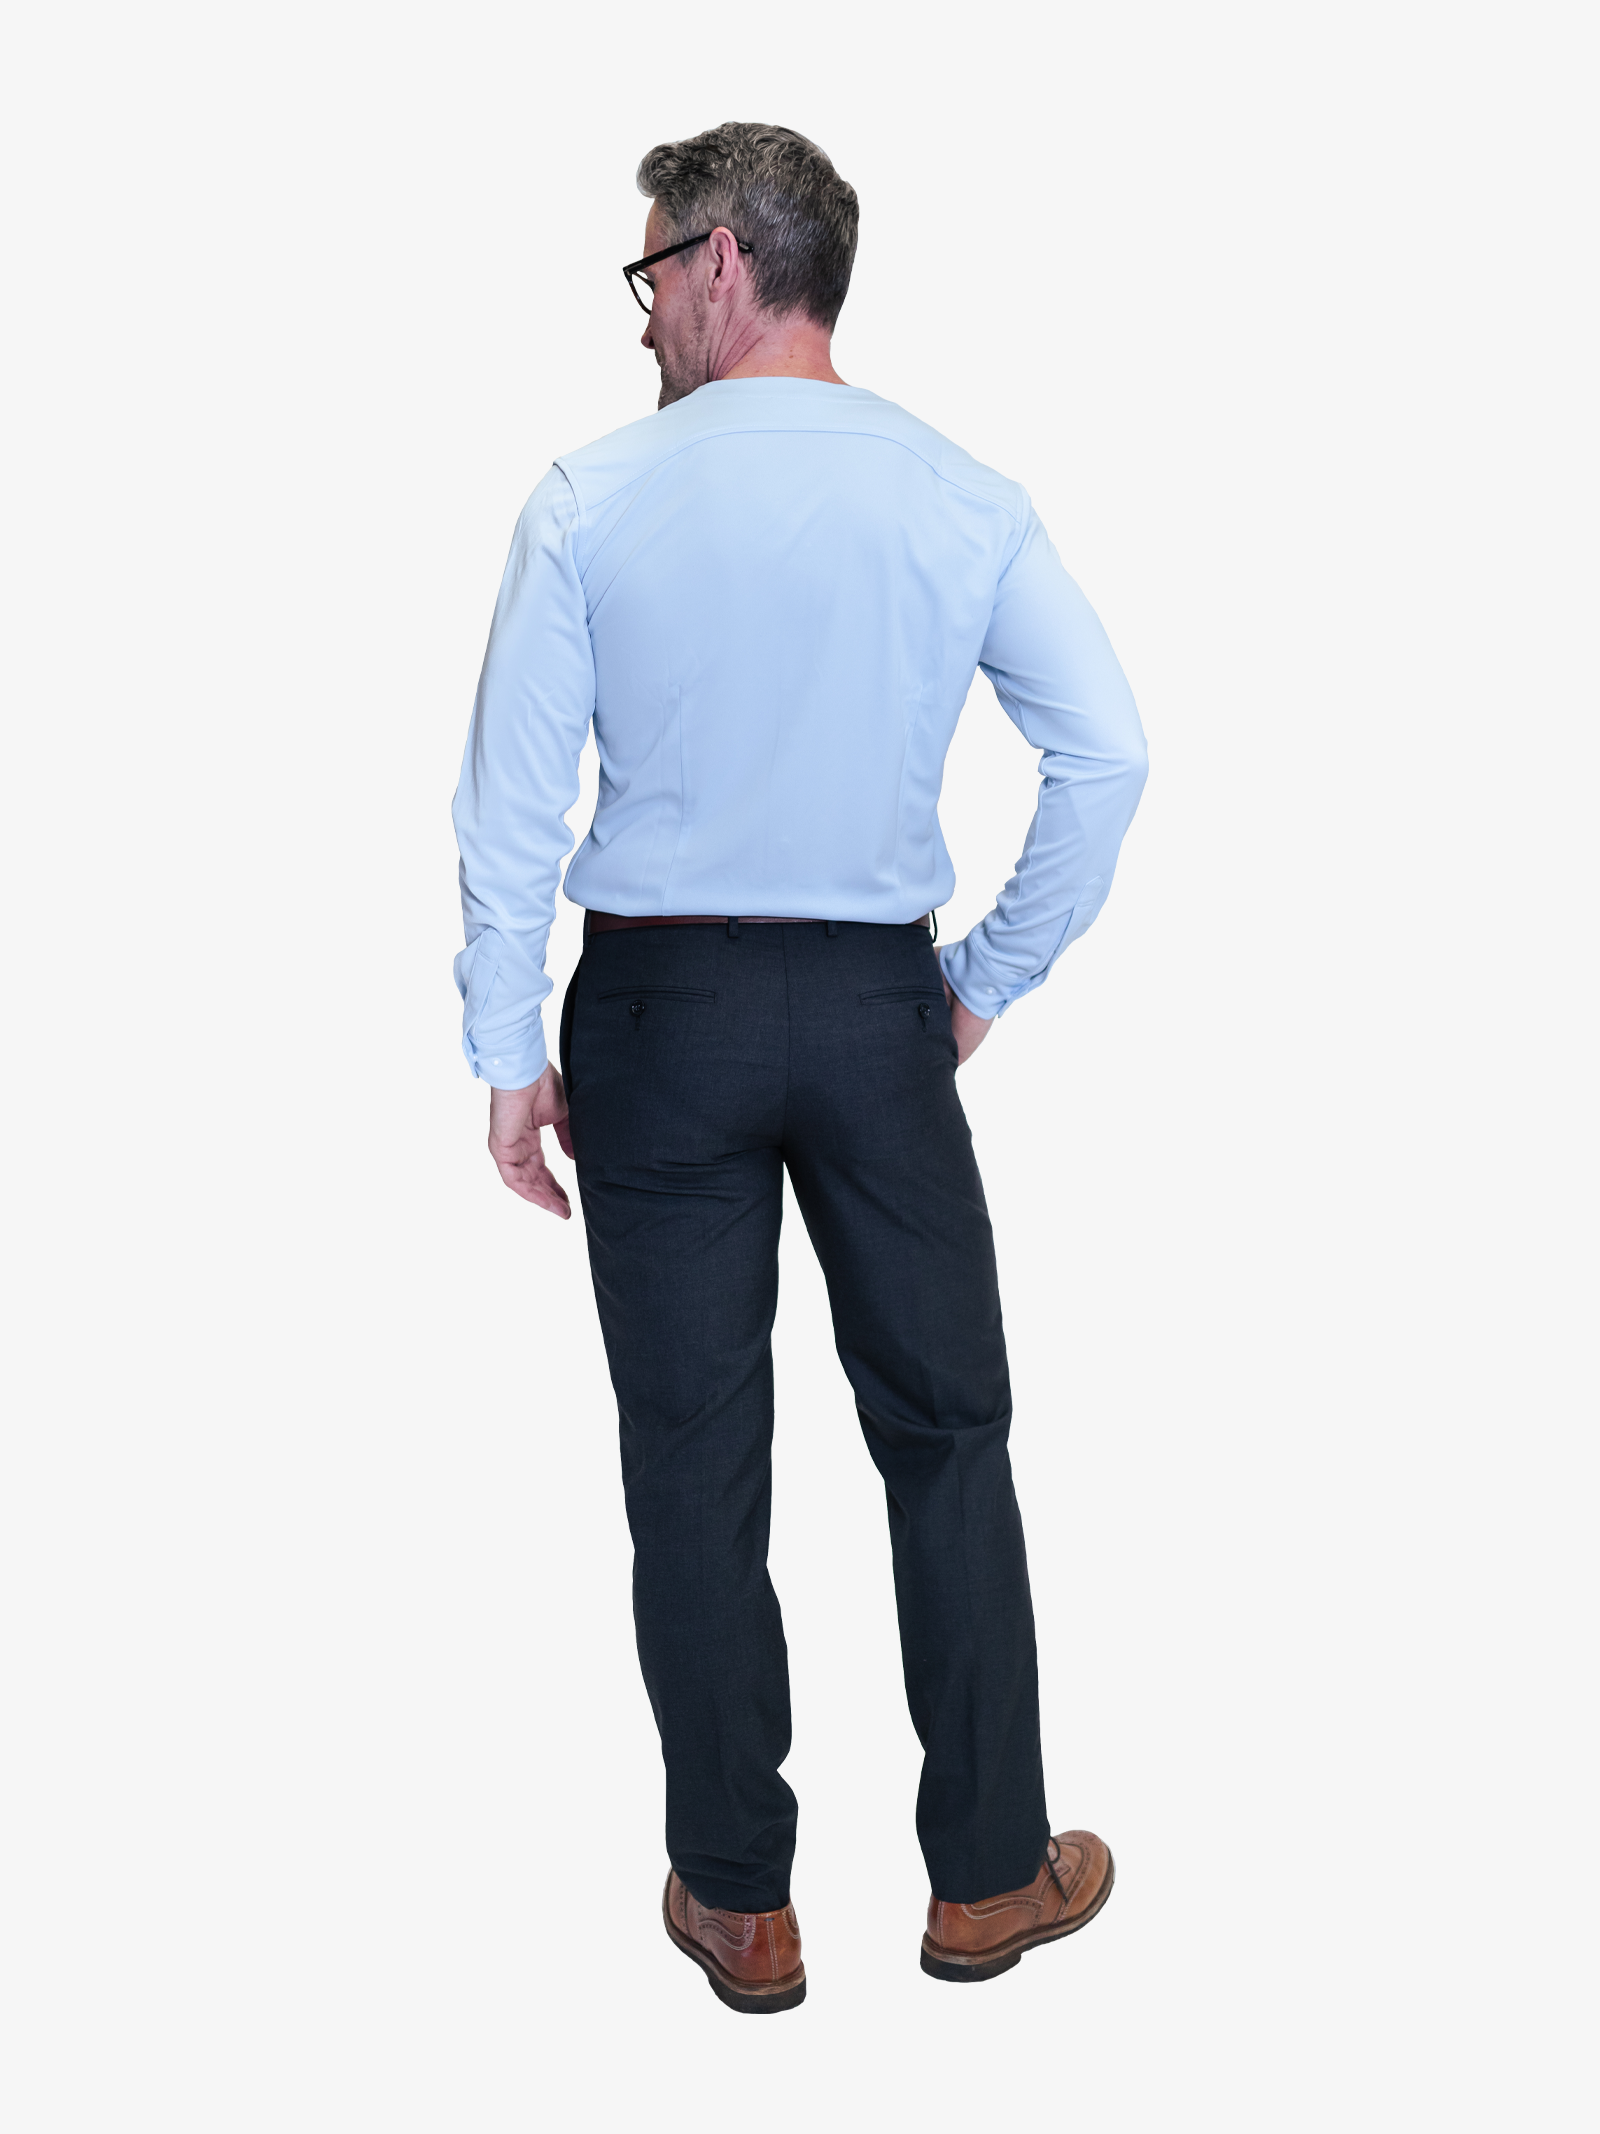 Showing the back of this light blue collarless button down with perfectly stitched darts for a fitted slim fit. 